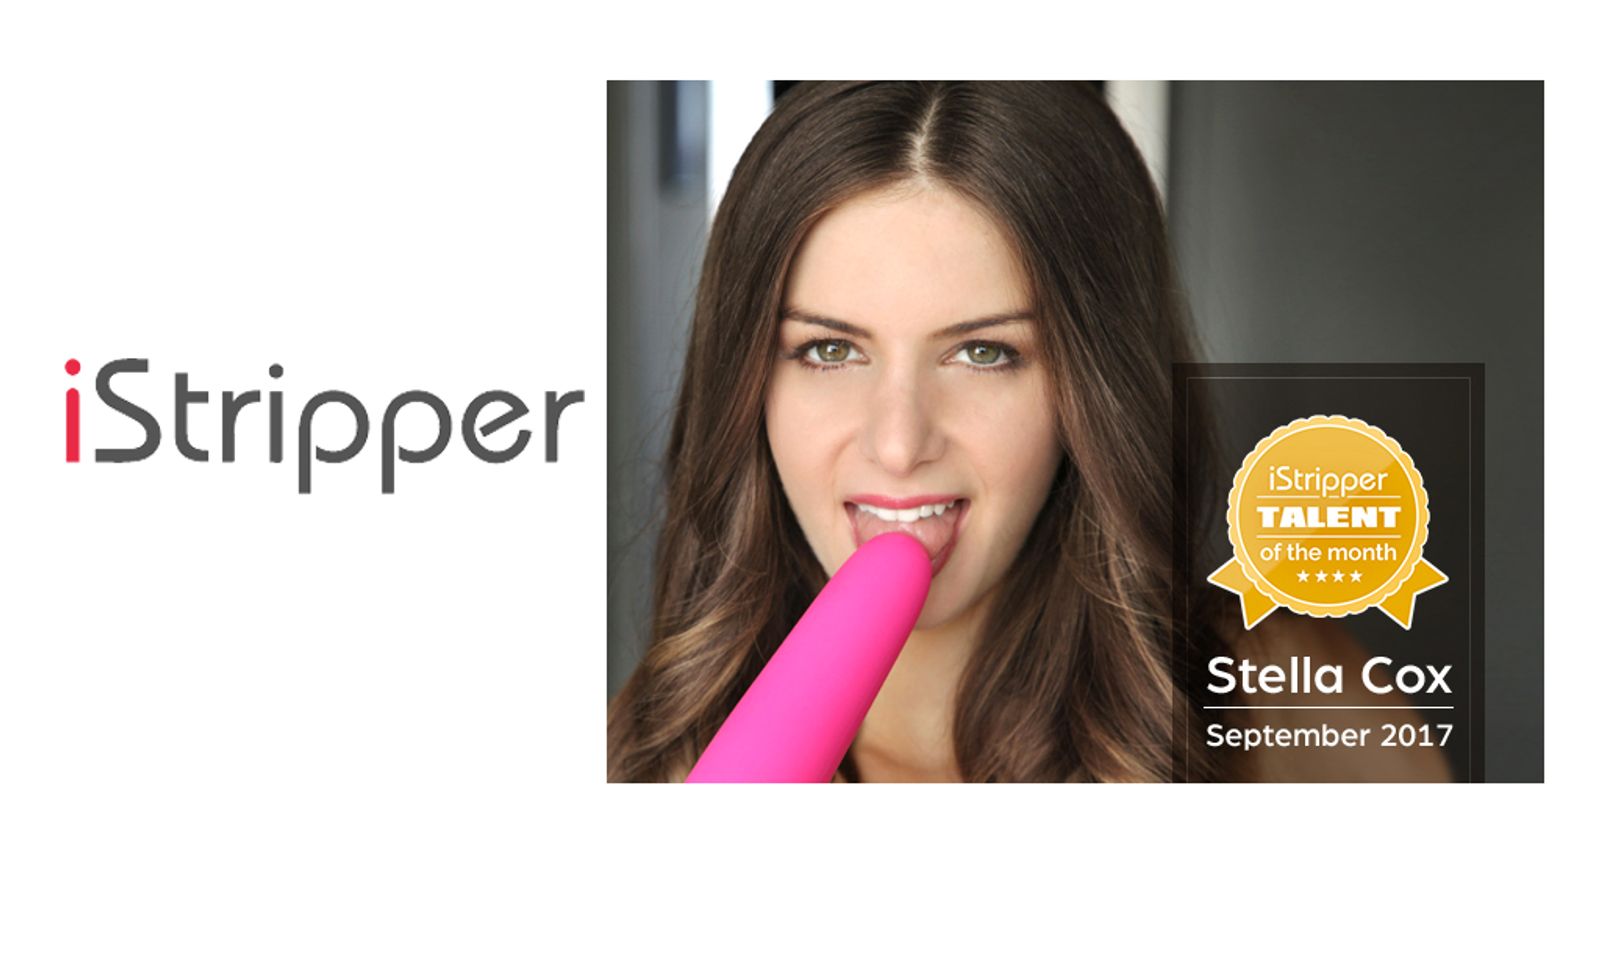 Stella Cox Named iStripper Talent of the Month